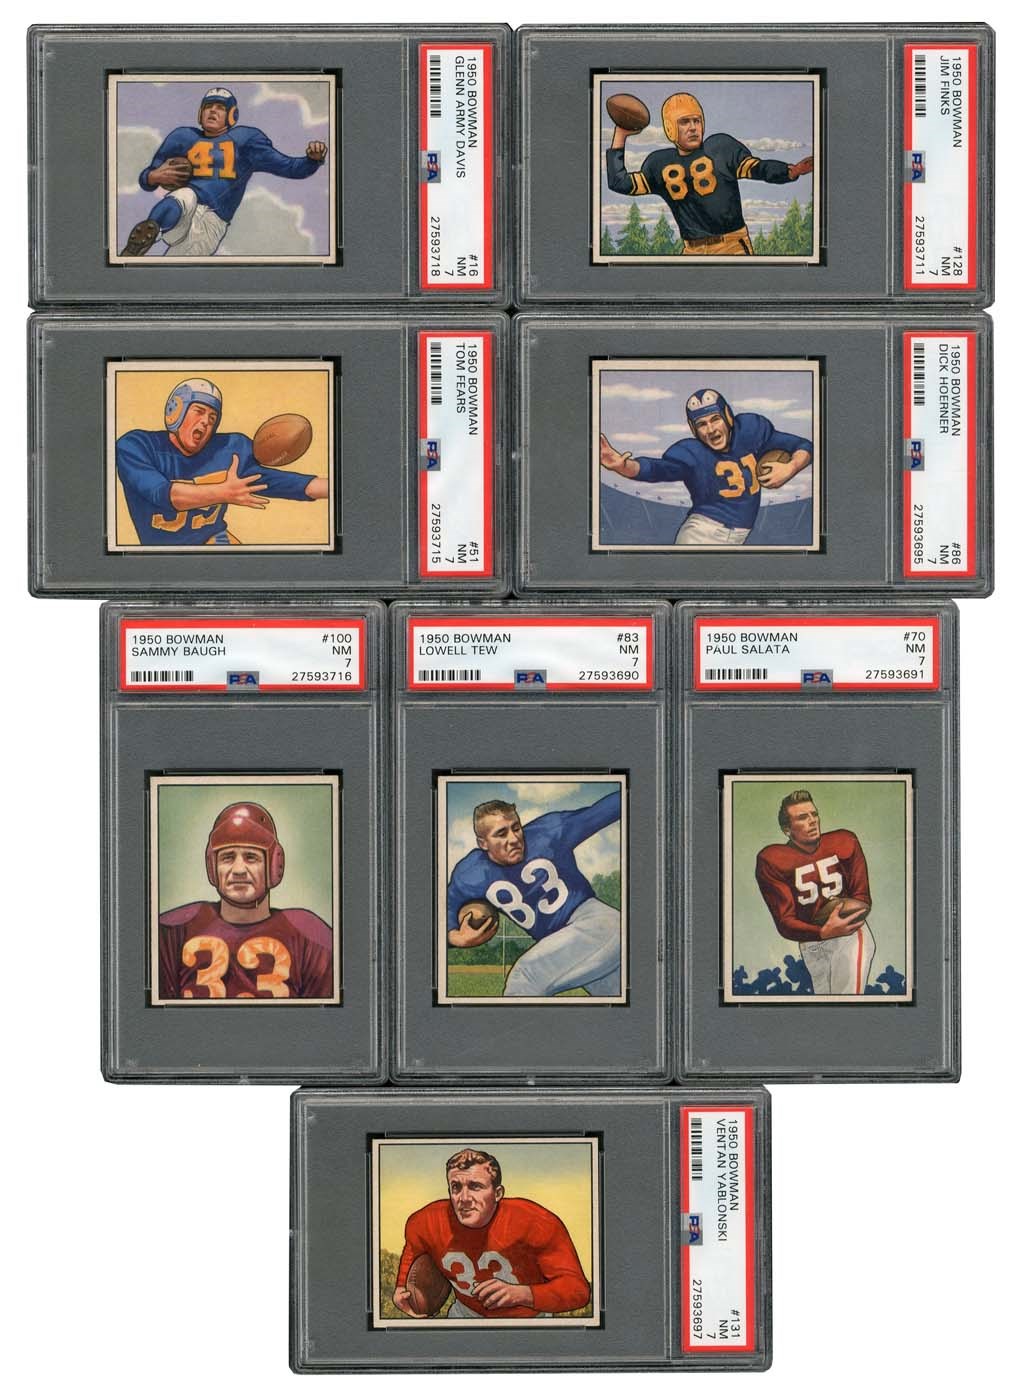 1950 Bowman Football Partial Set of (86/144) cards with PSA Graded